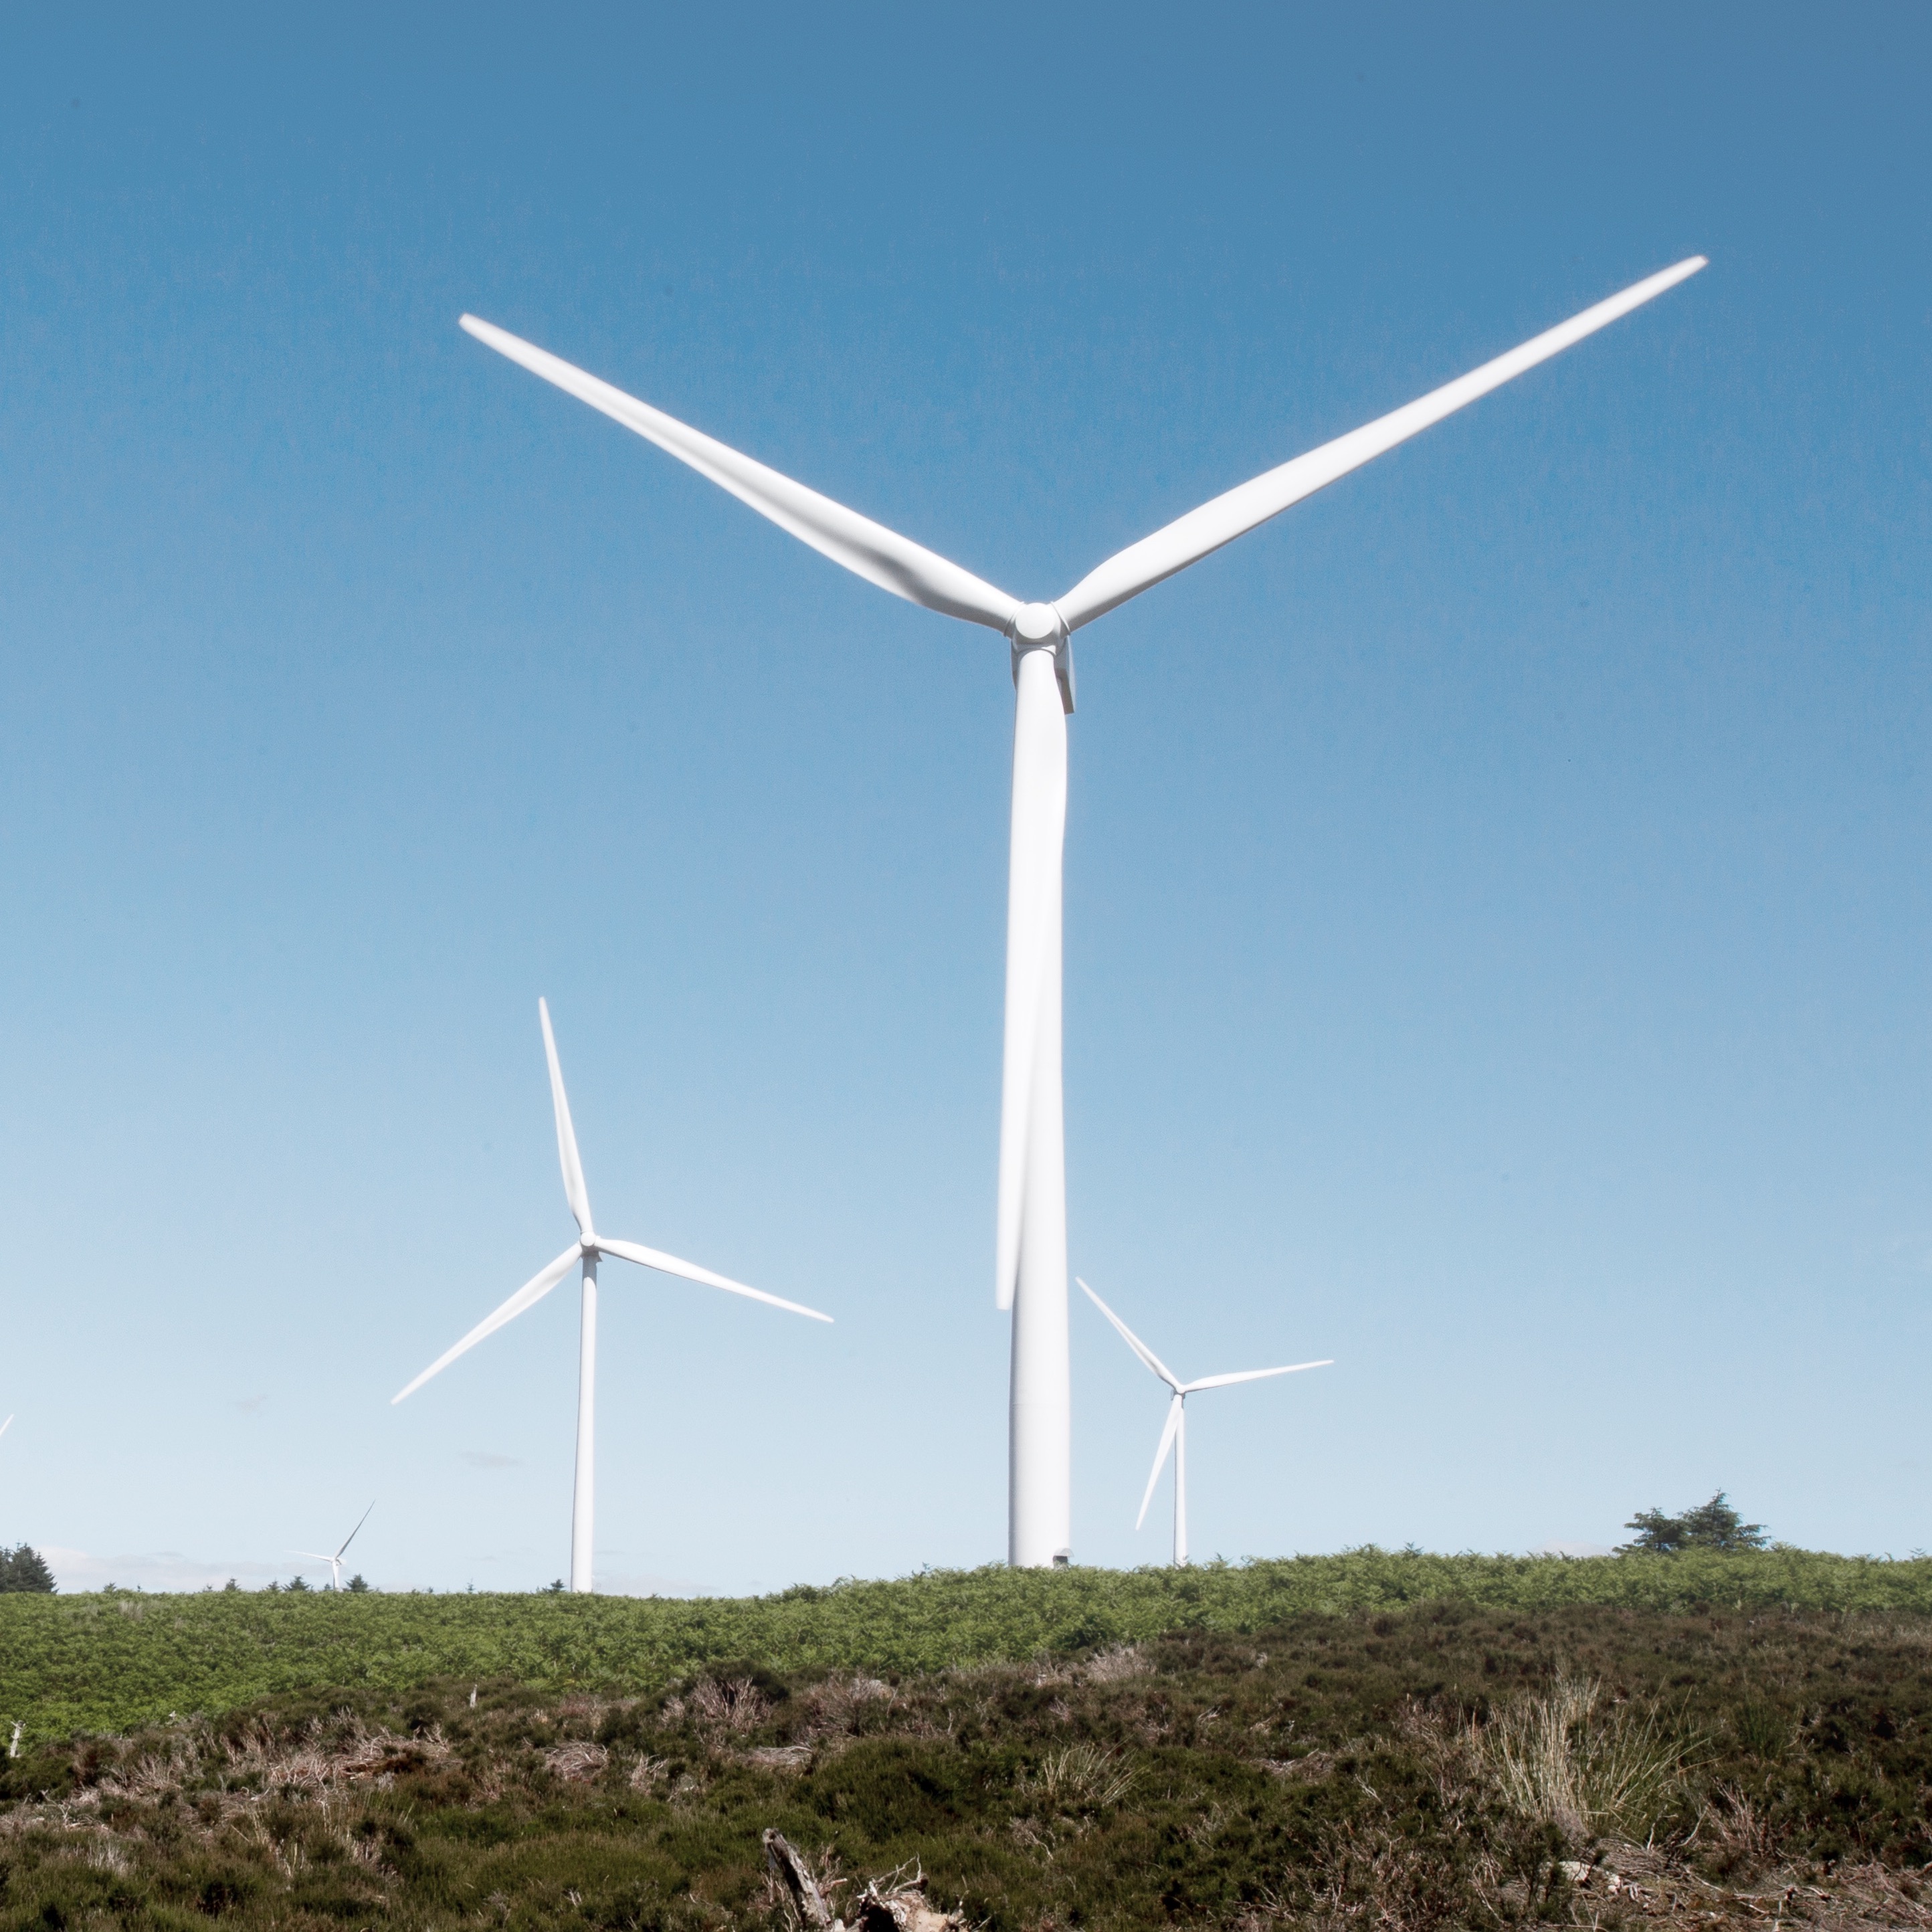 Image of a wind turbine located in a green landscape, with blue skies above.